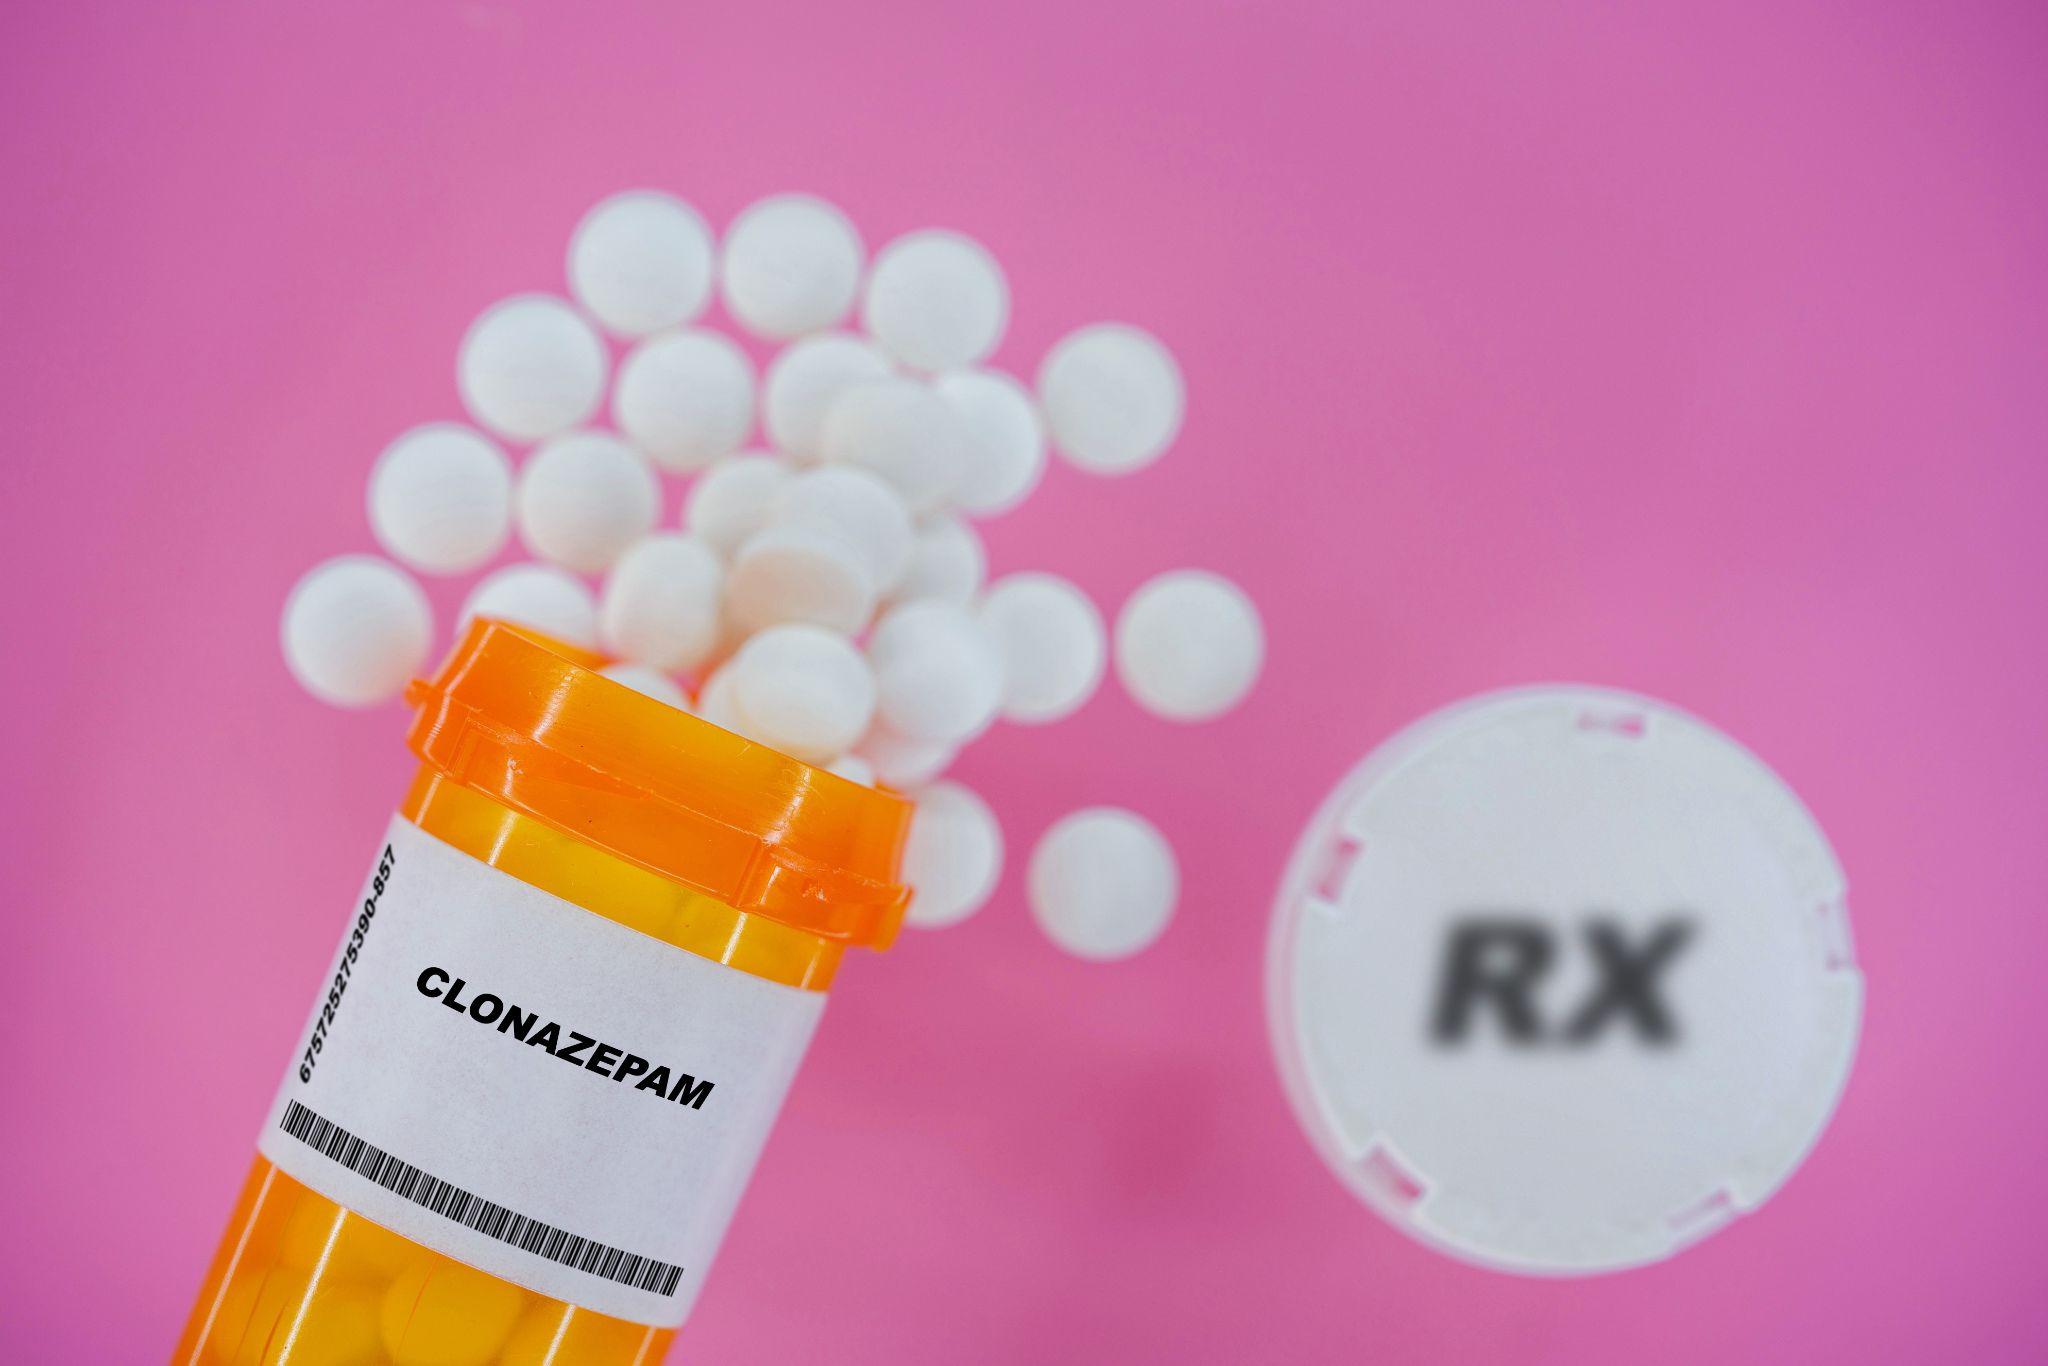 clonazepam Rx medicine pills in plactic vial with tablets.